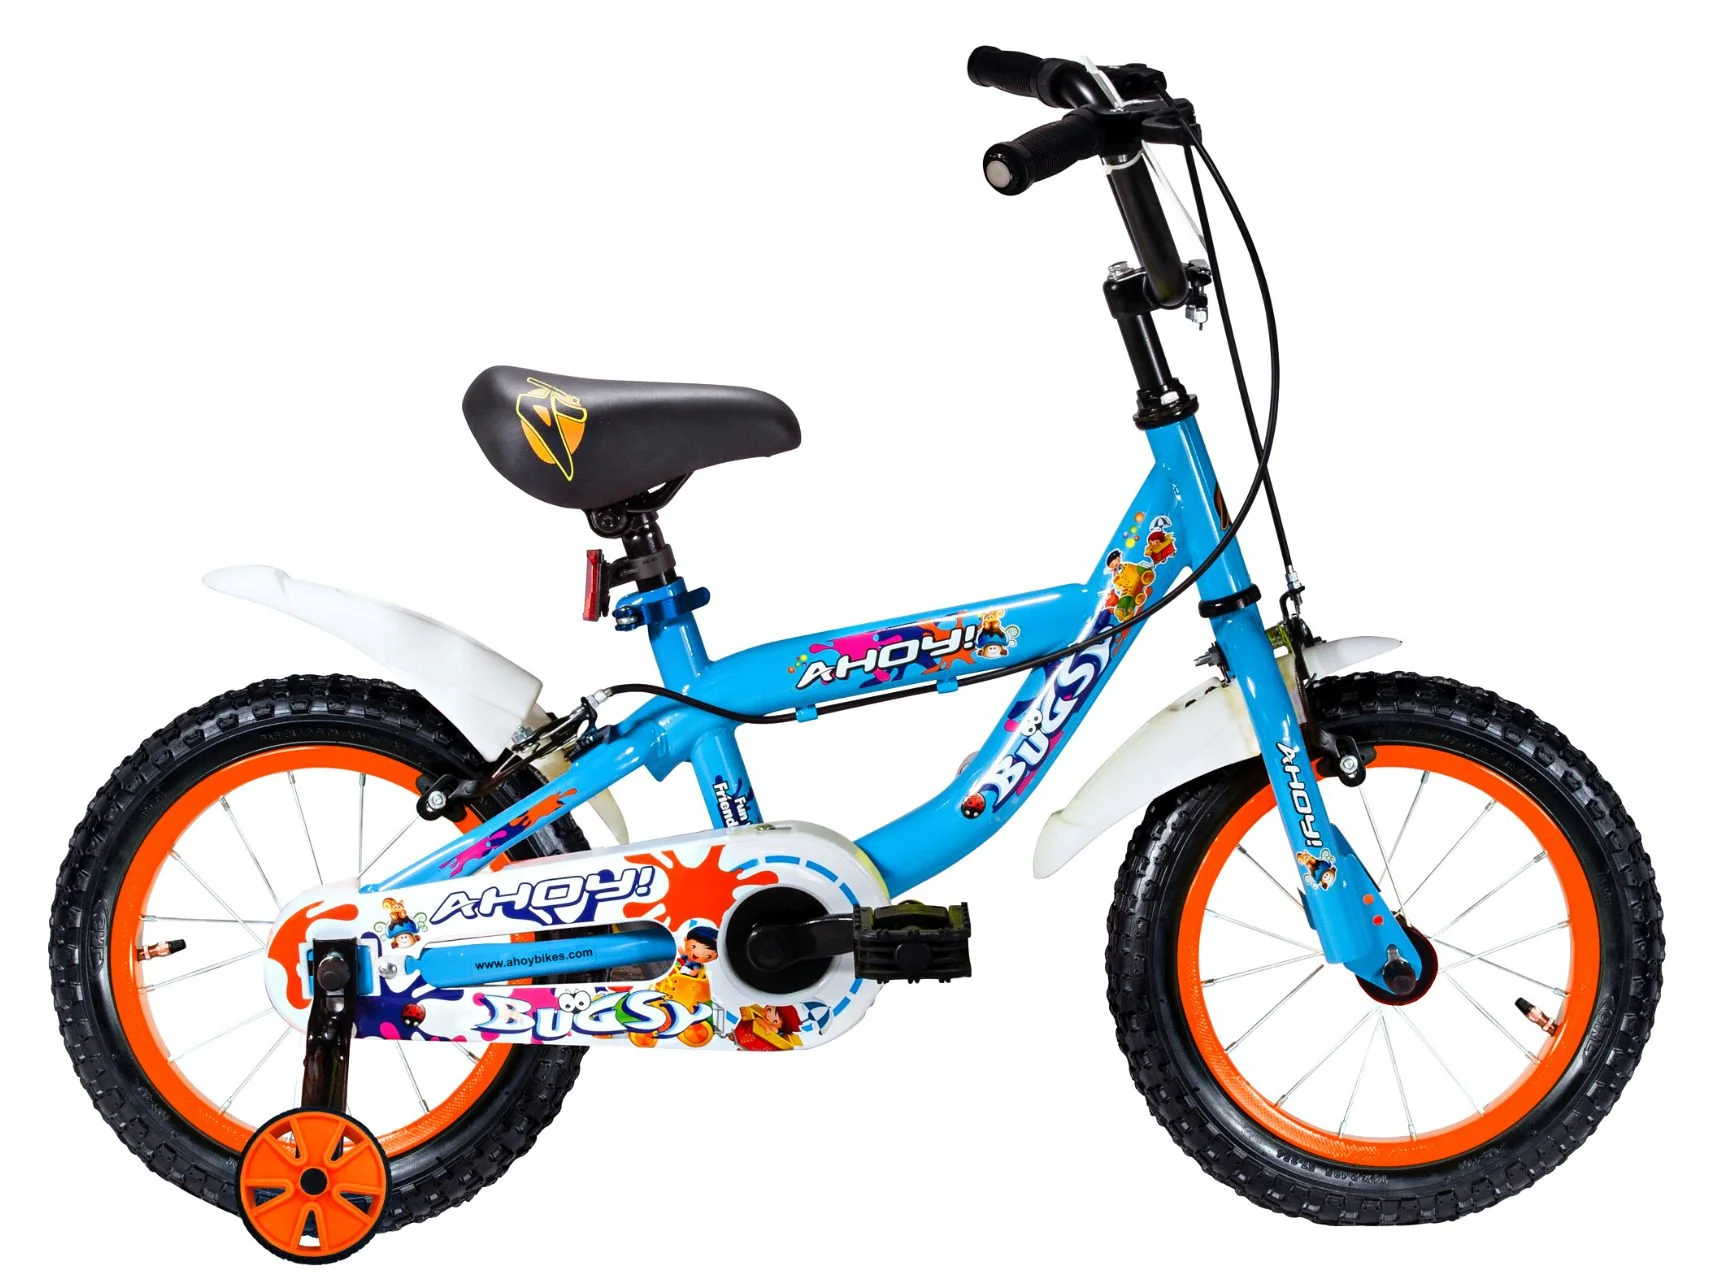 Bugsy girls bike single speed 14T | Buy blue cycle non gear for kids